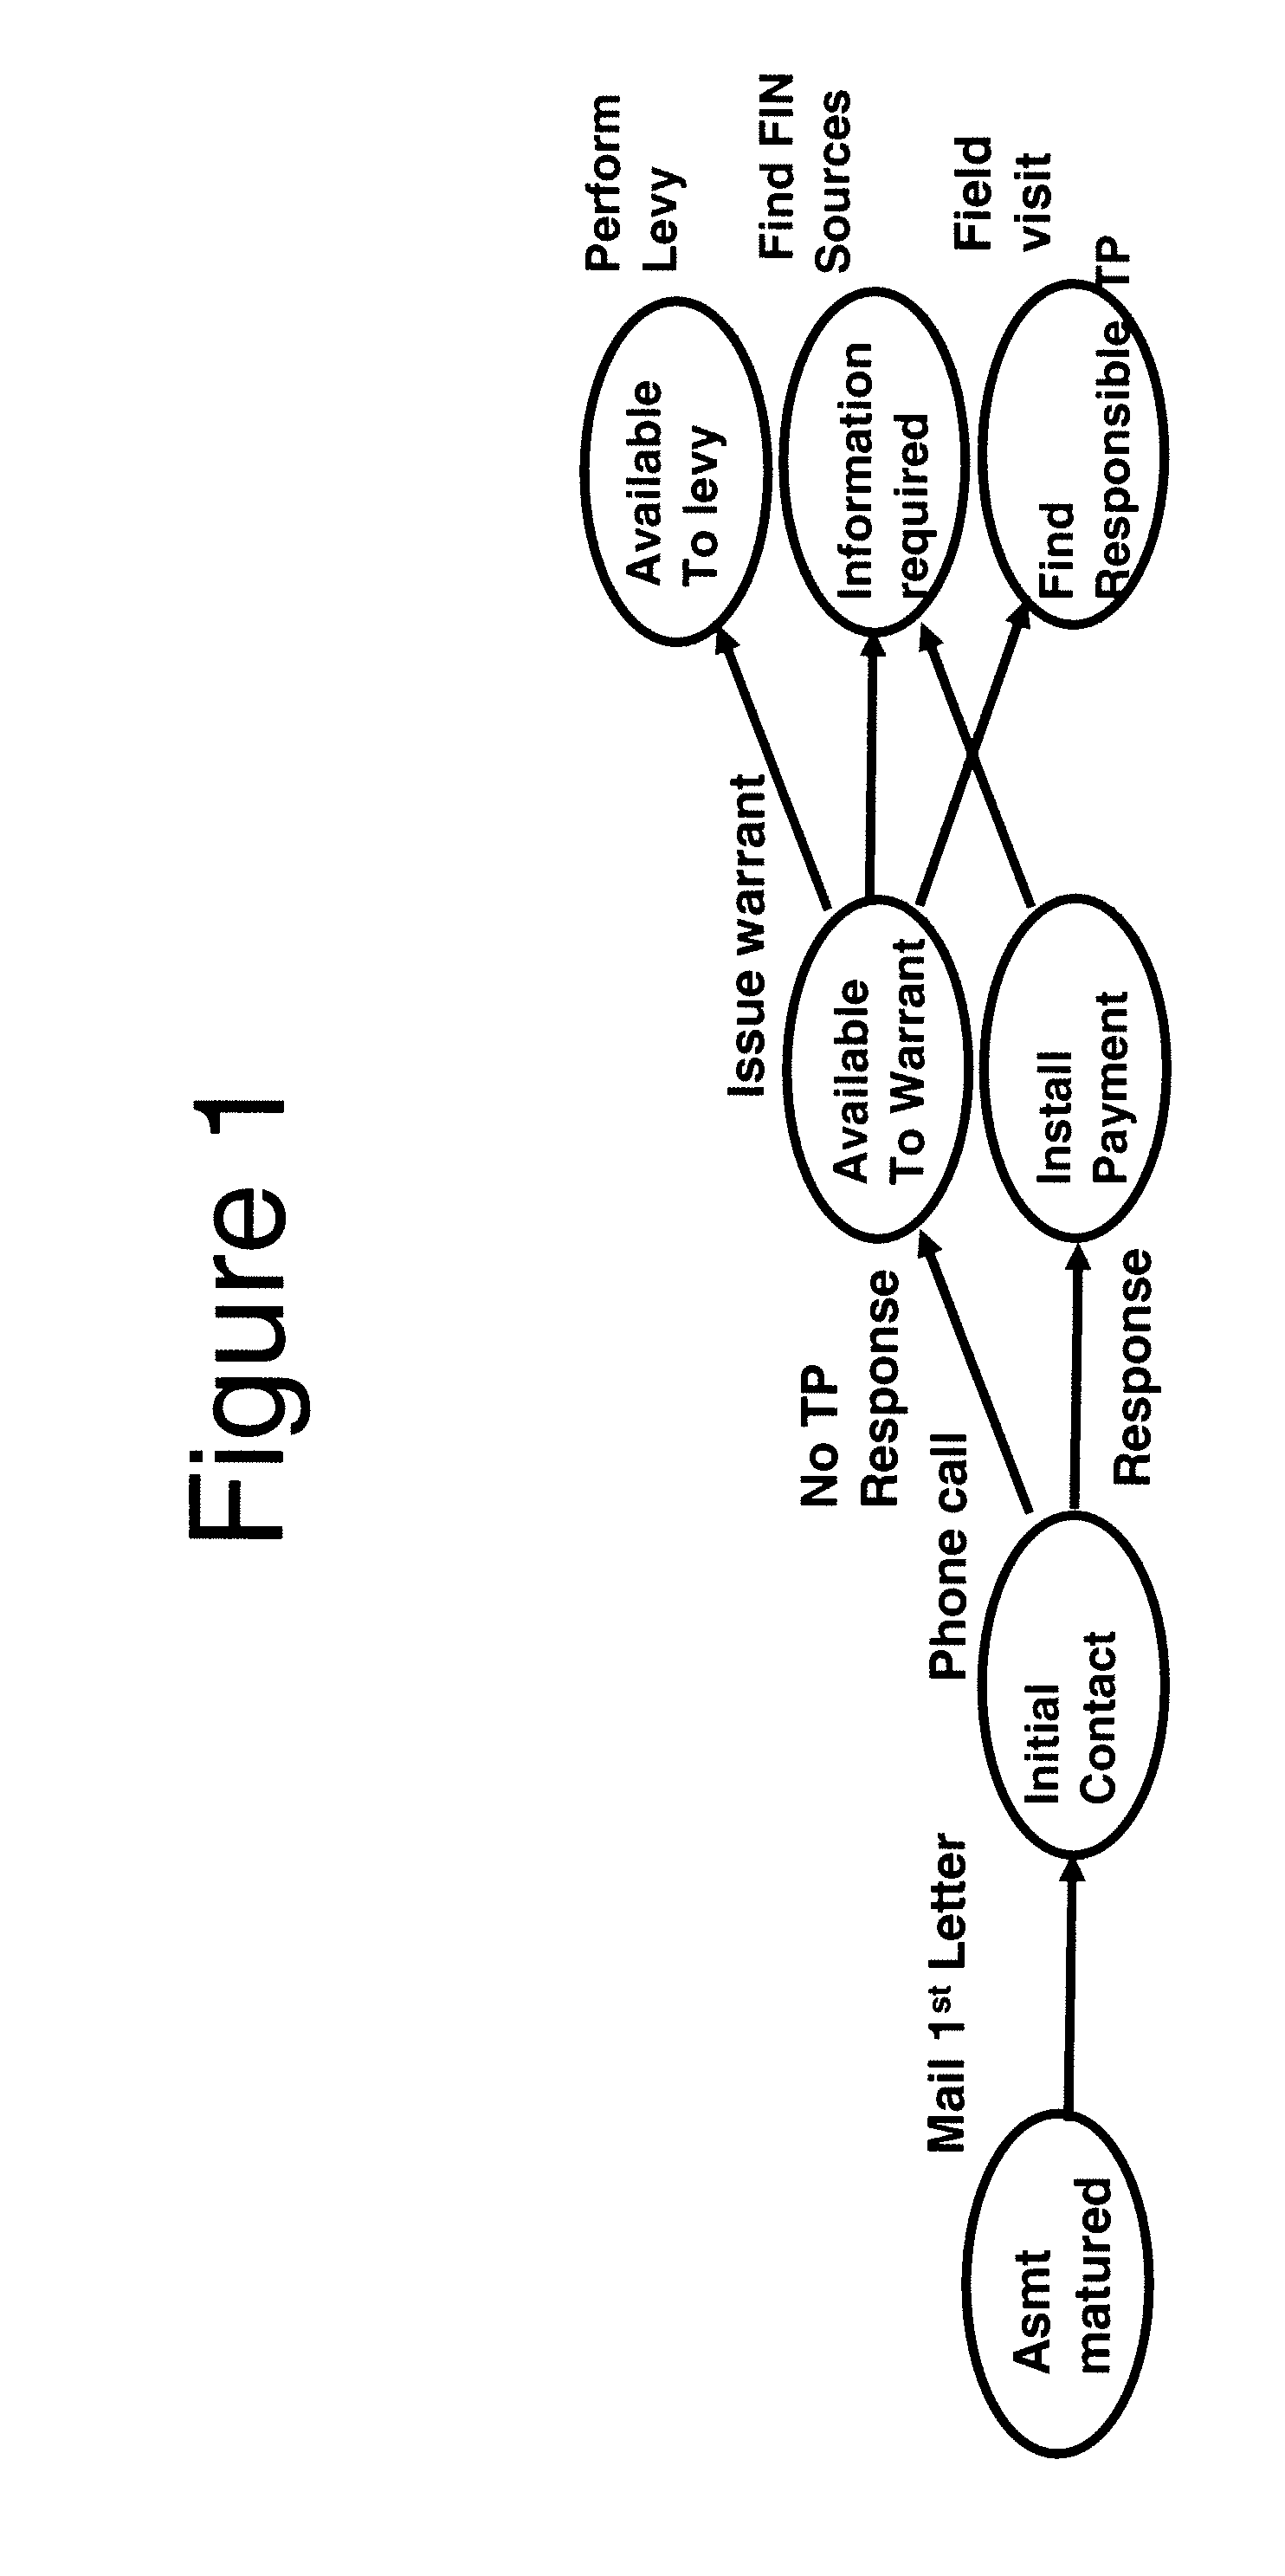 Method and system for debt collection optimization